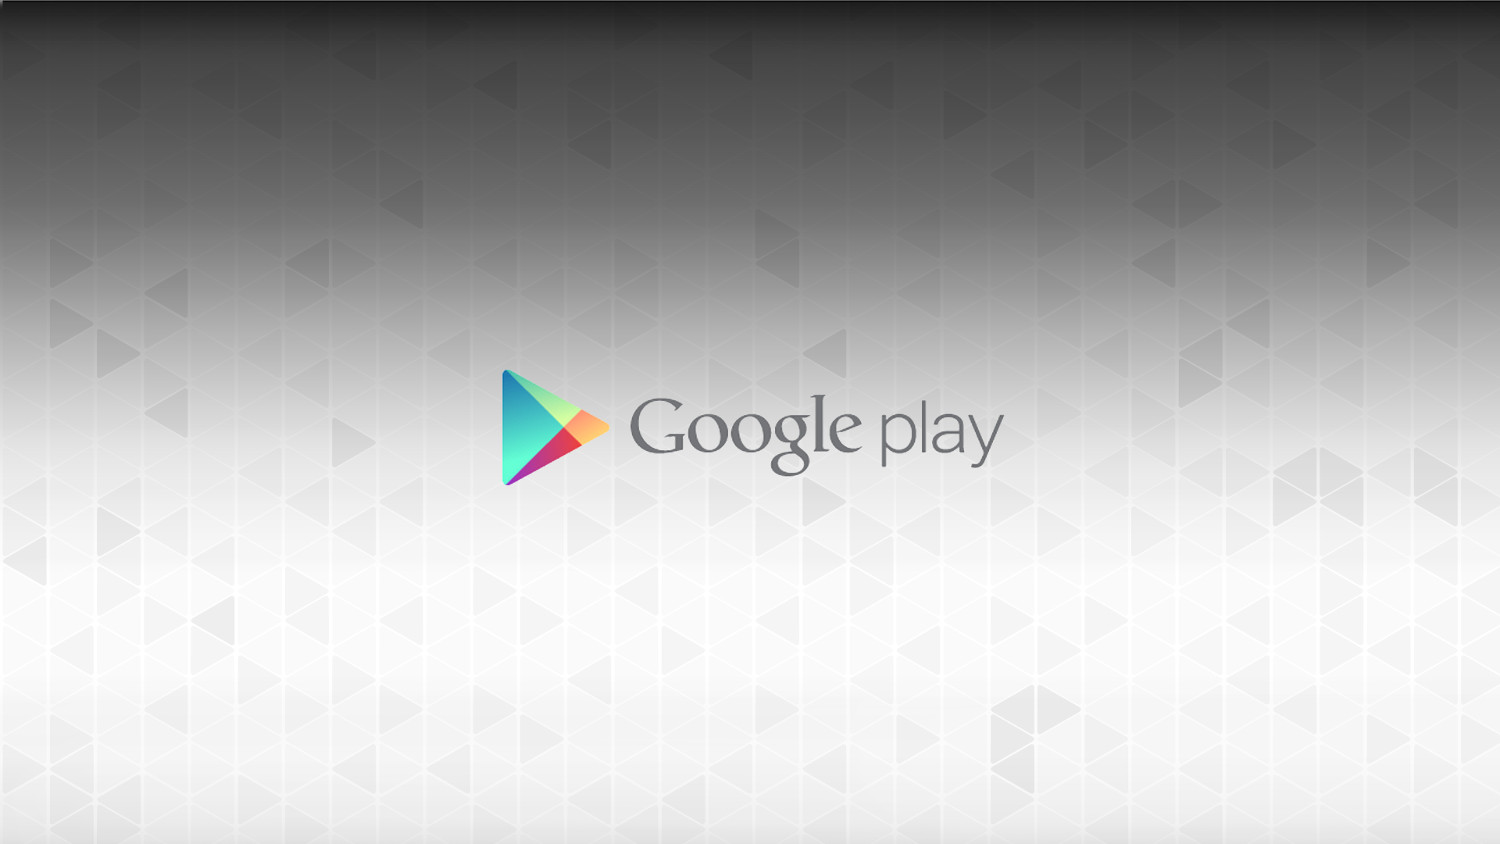 In Google Play there will be a new category?